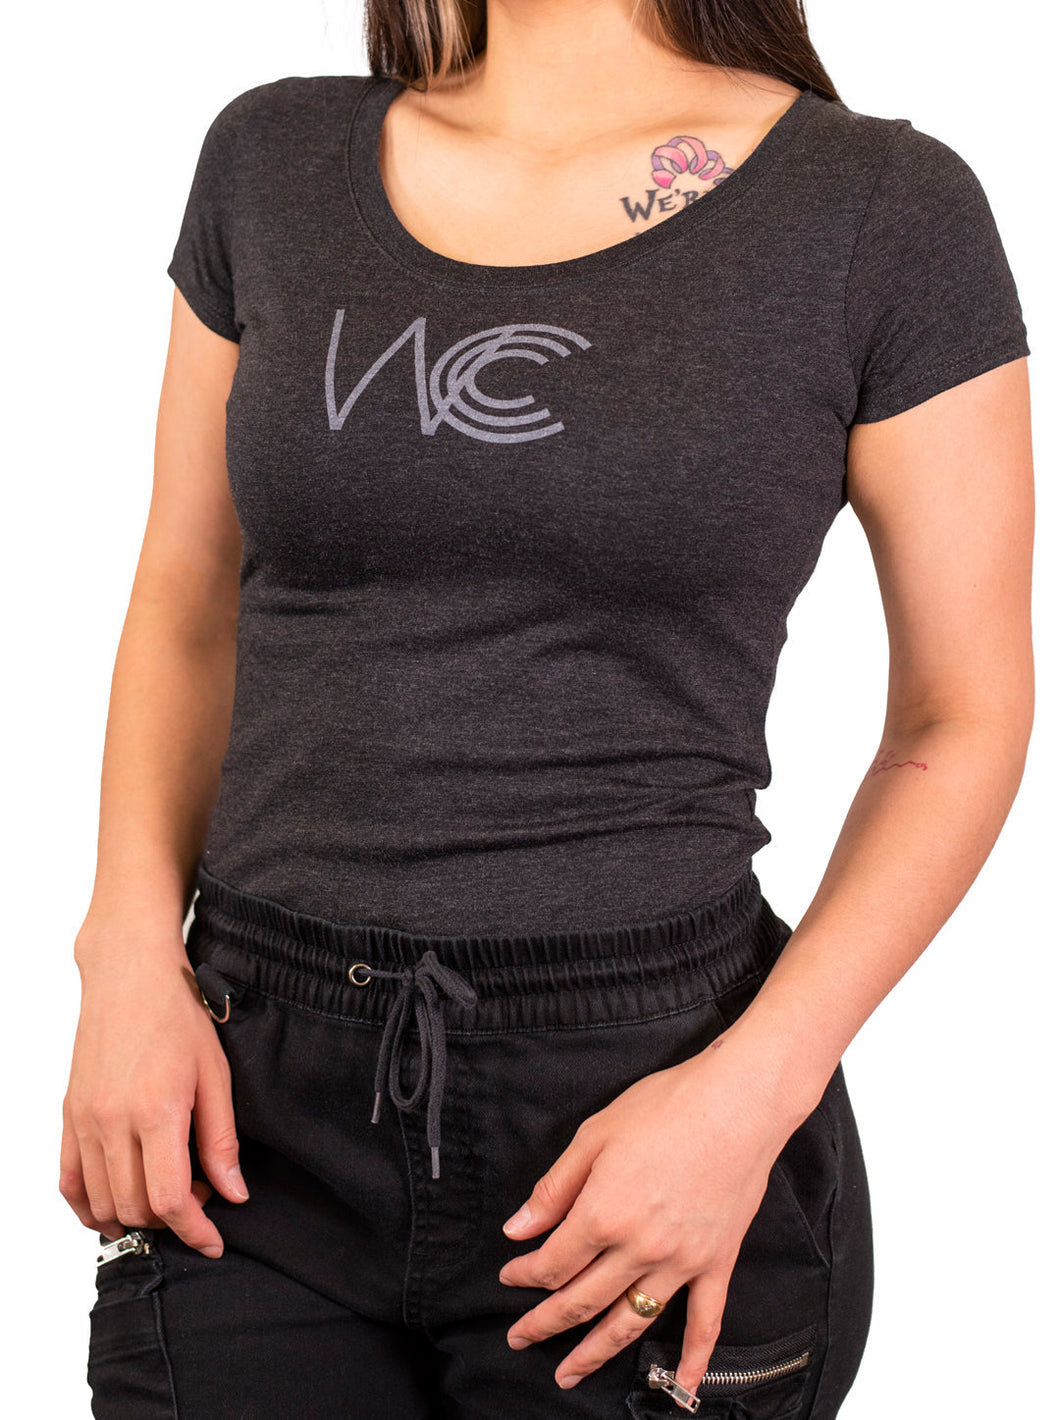 WCCC Palm Tree Flowy Cropped Tee